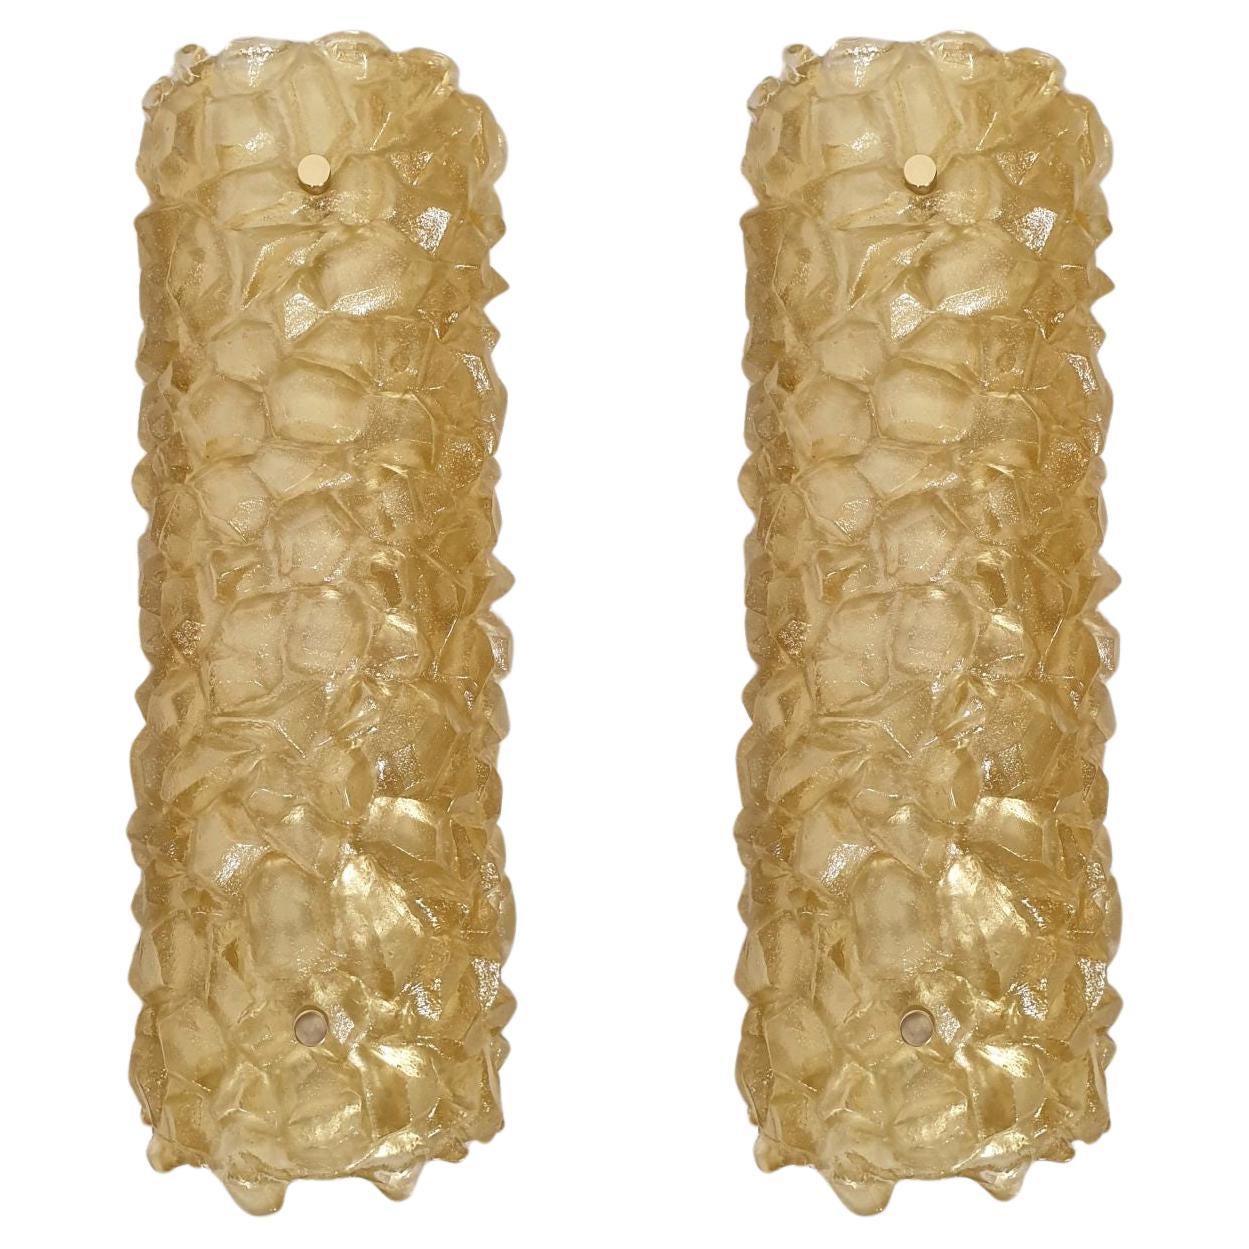 Gold Murano glass sconces, Italy - a pair For Sale